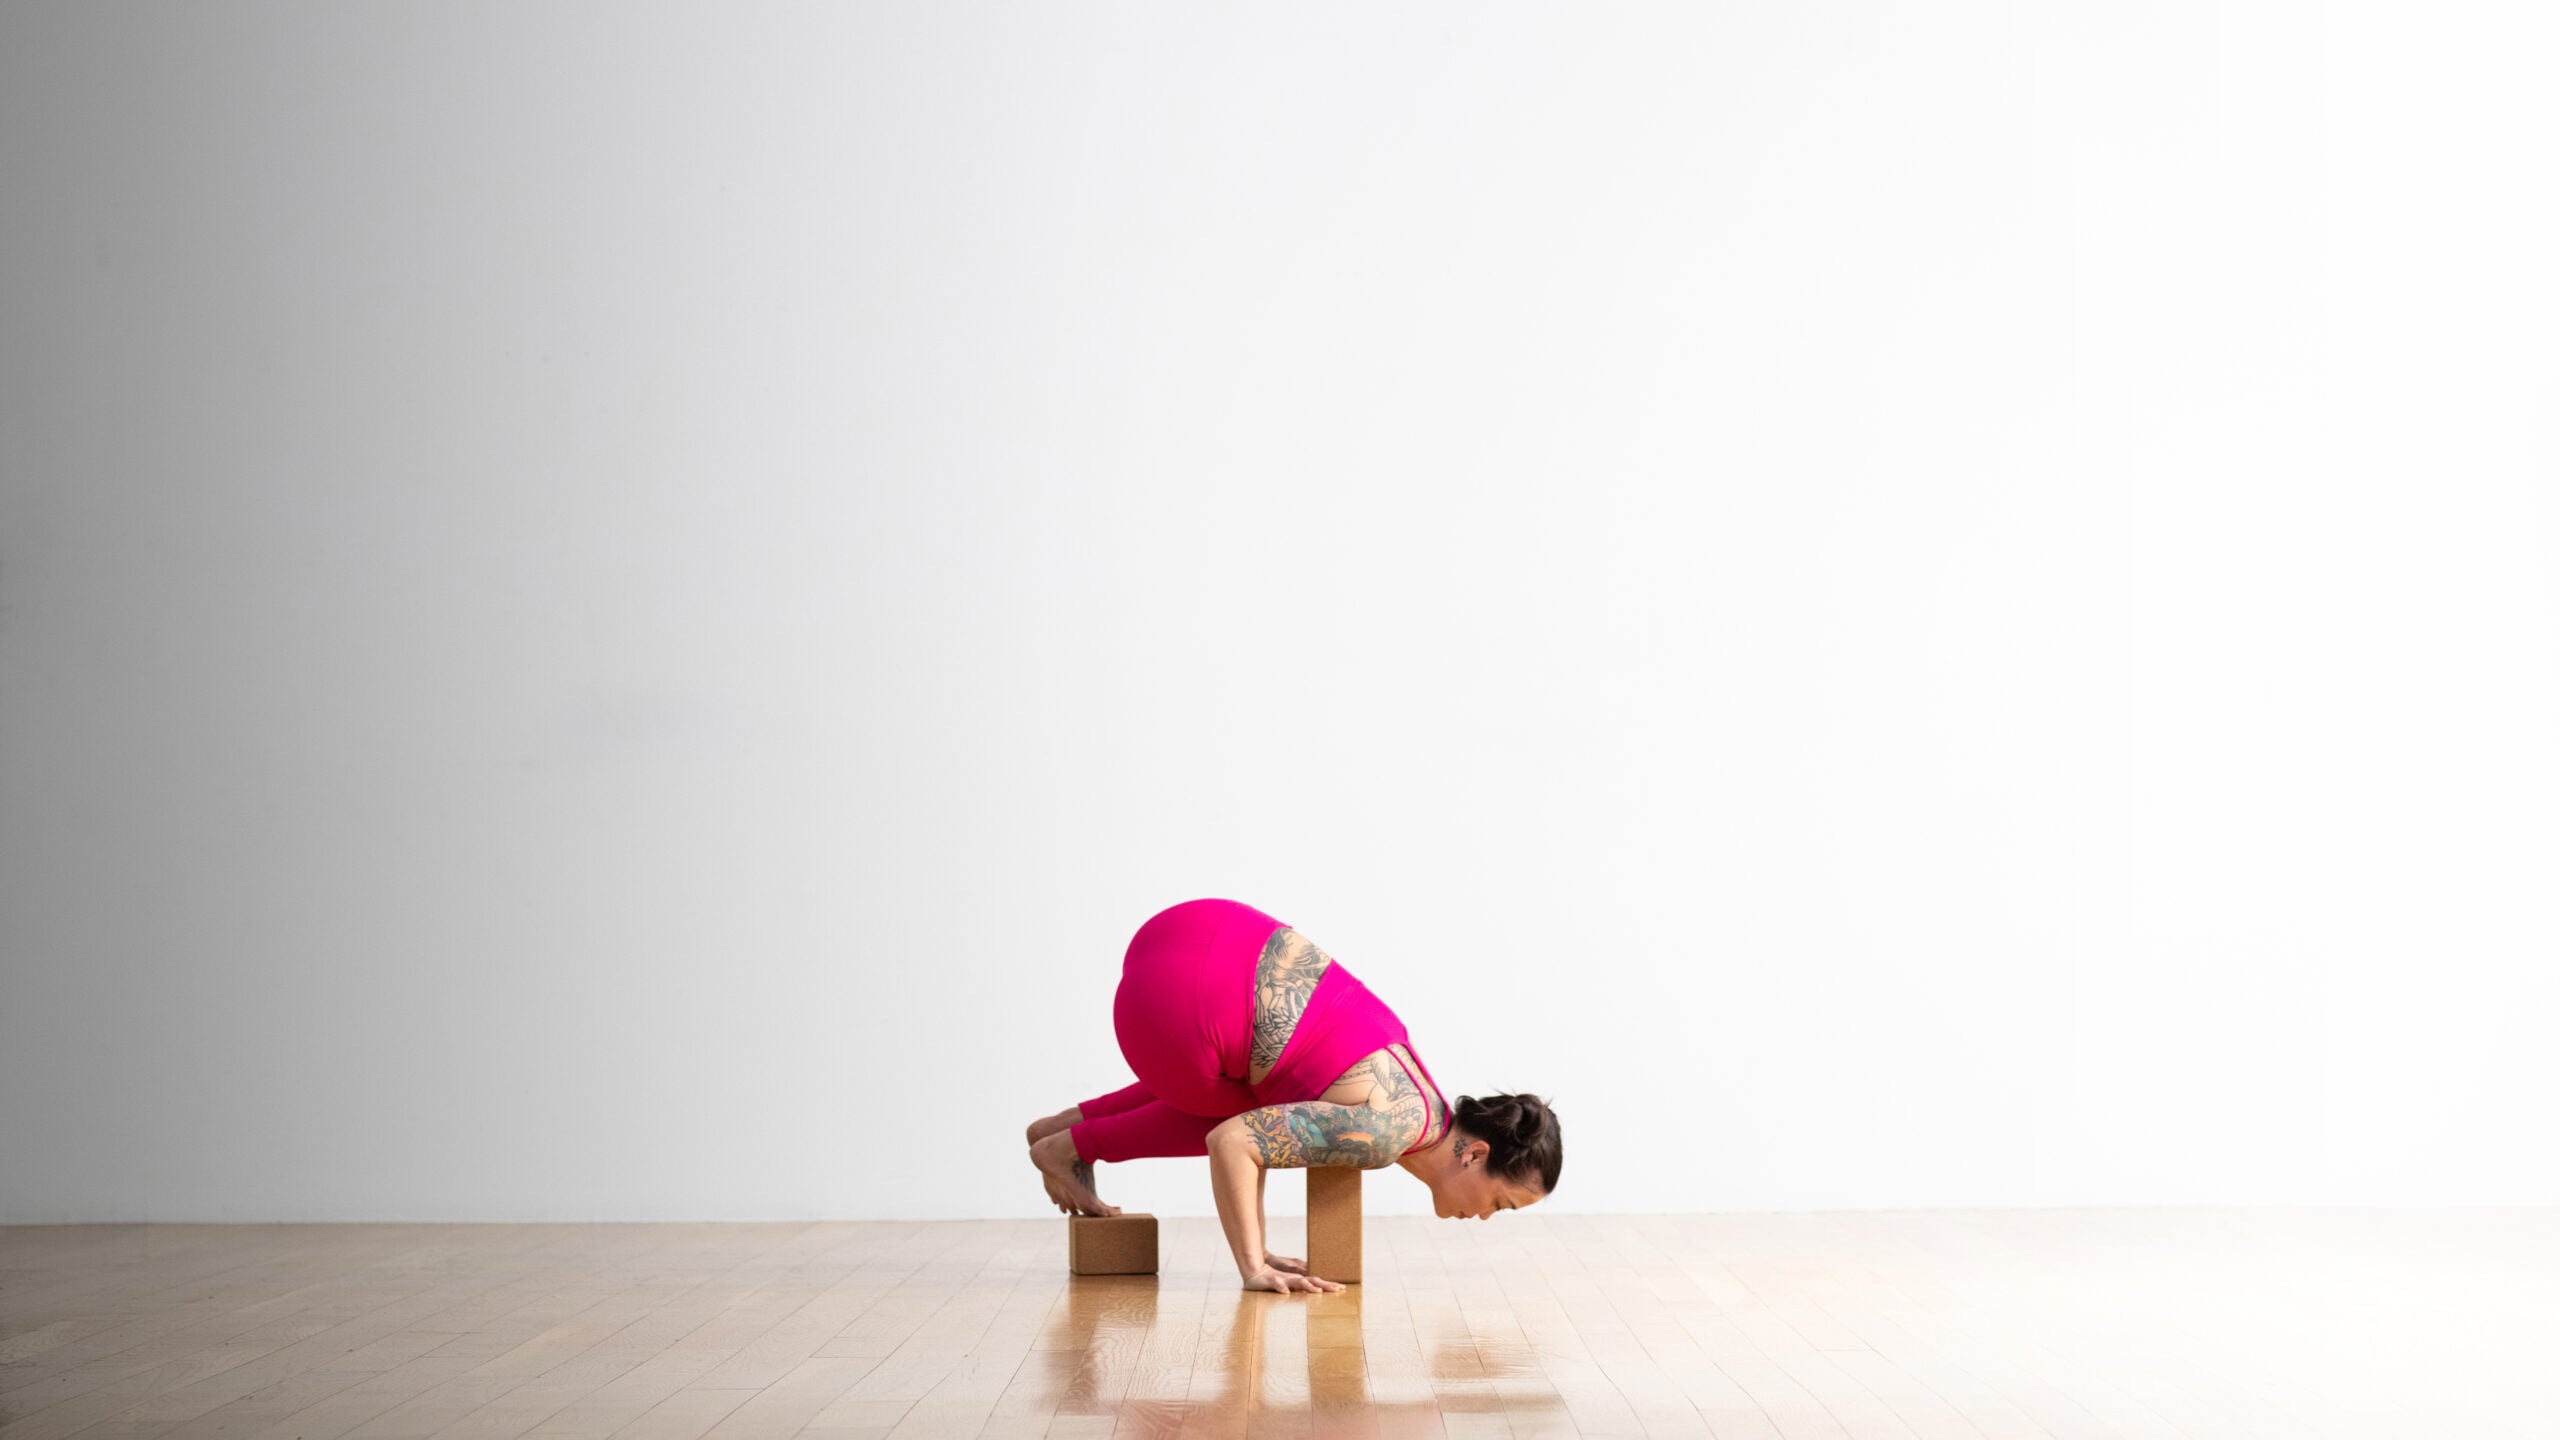 Yoga & Lifestyle - Side Crow pose strengthens the arms, wrists and  shoulders, tones the belly and spine, and as a twisting pose, helps promote  detoxification of the body. The pose also